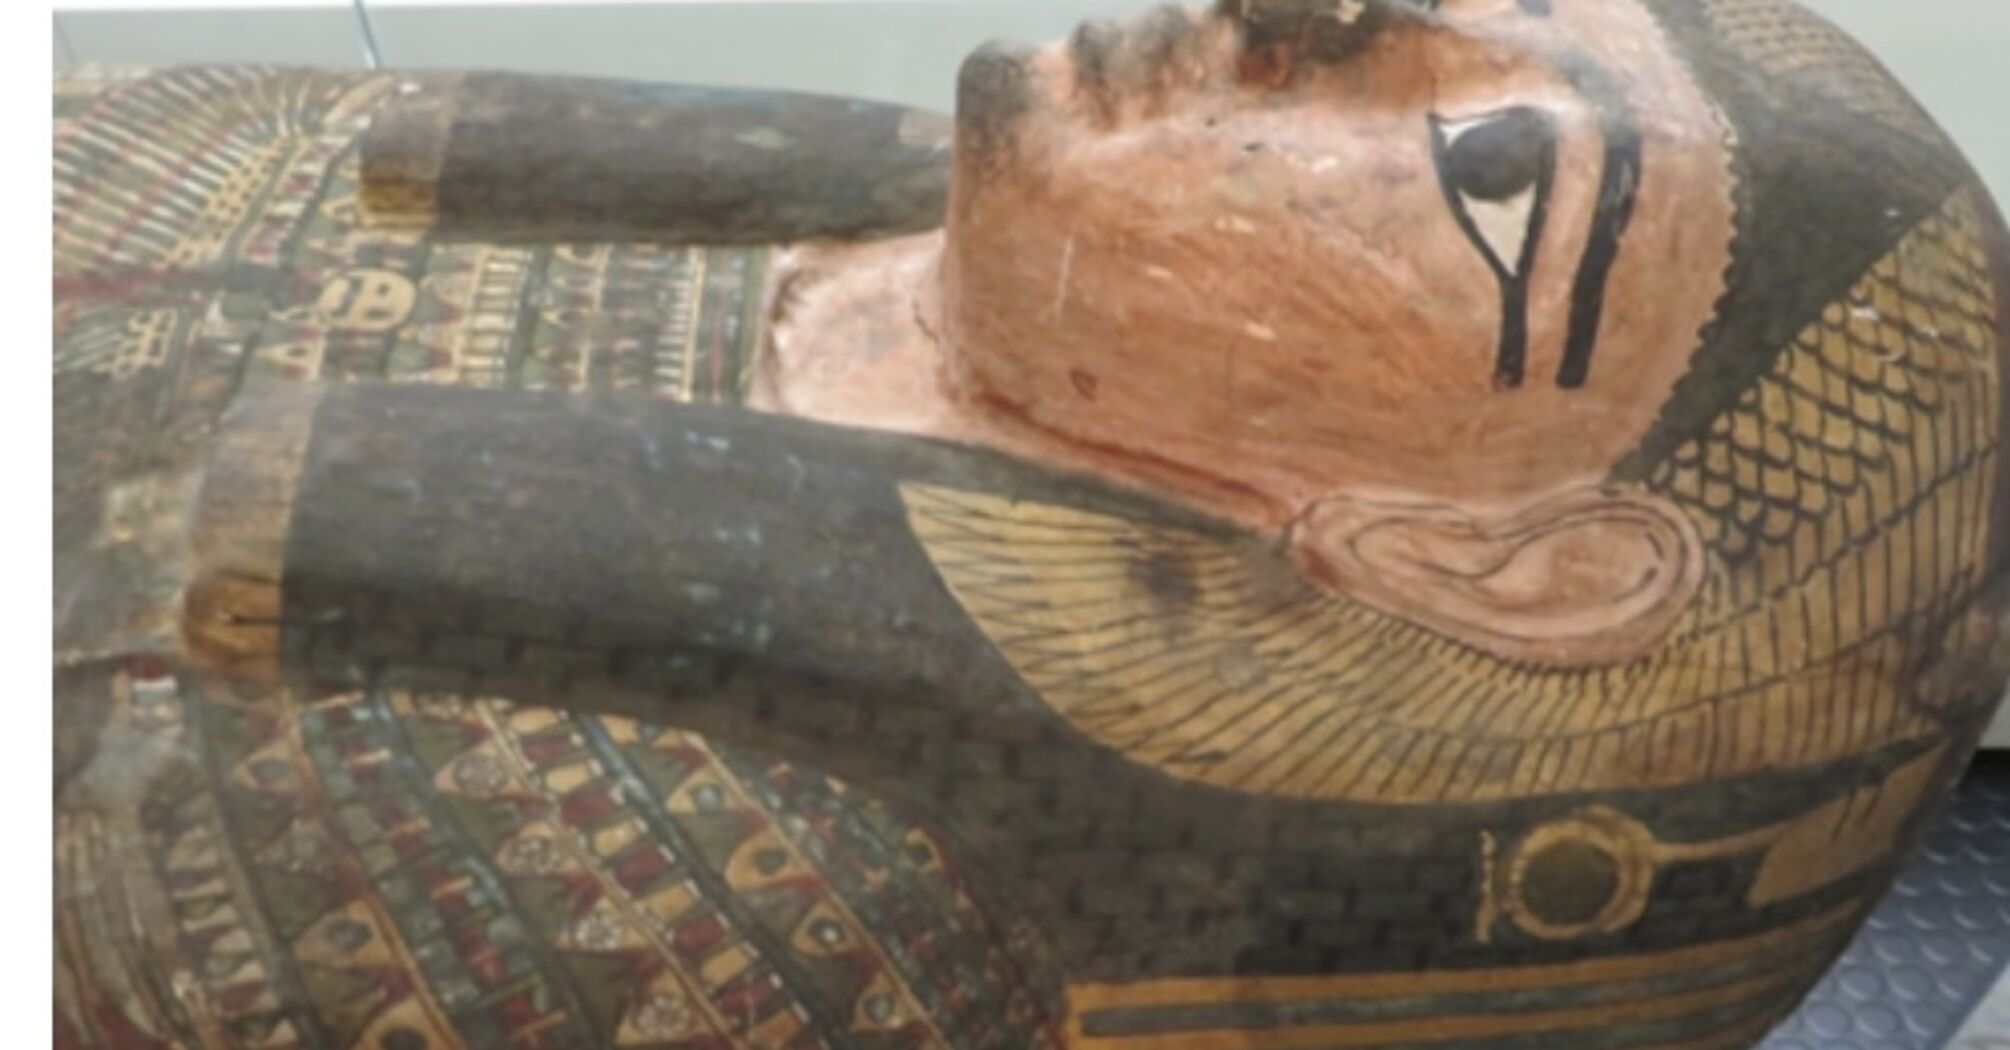 Mummy of a 2600-year-old woman found in Egypt: she died a terrible death 